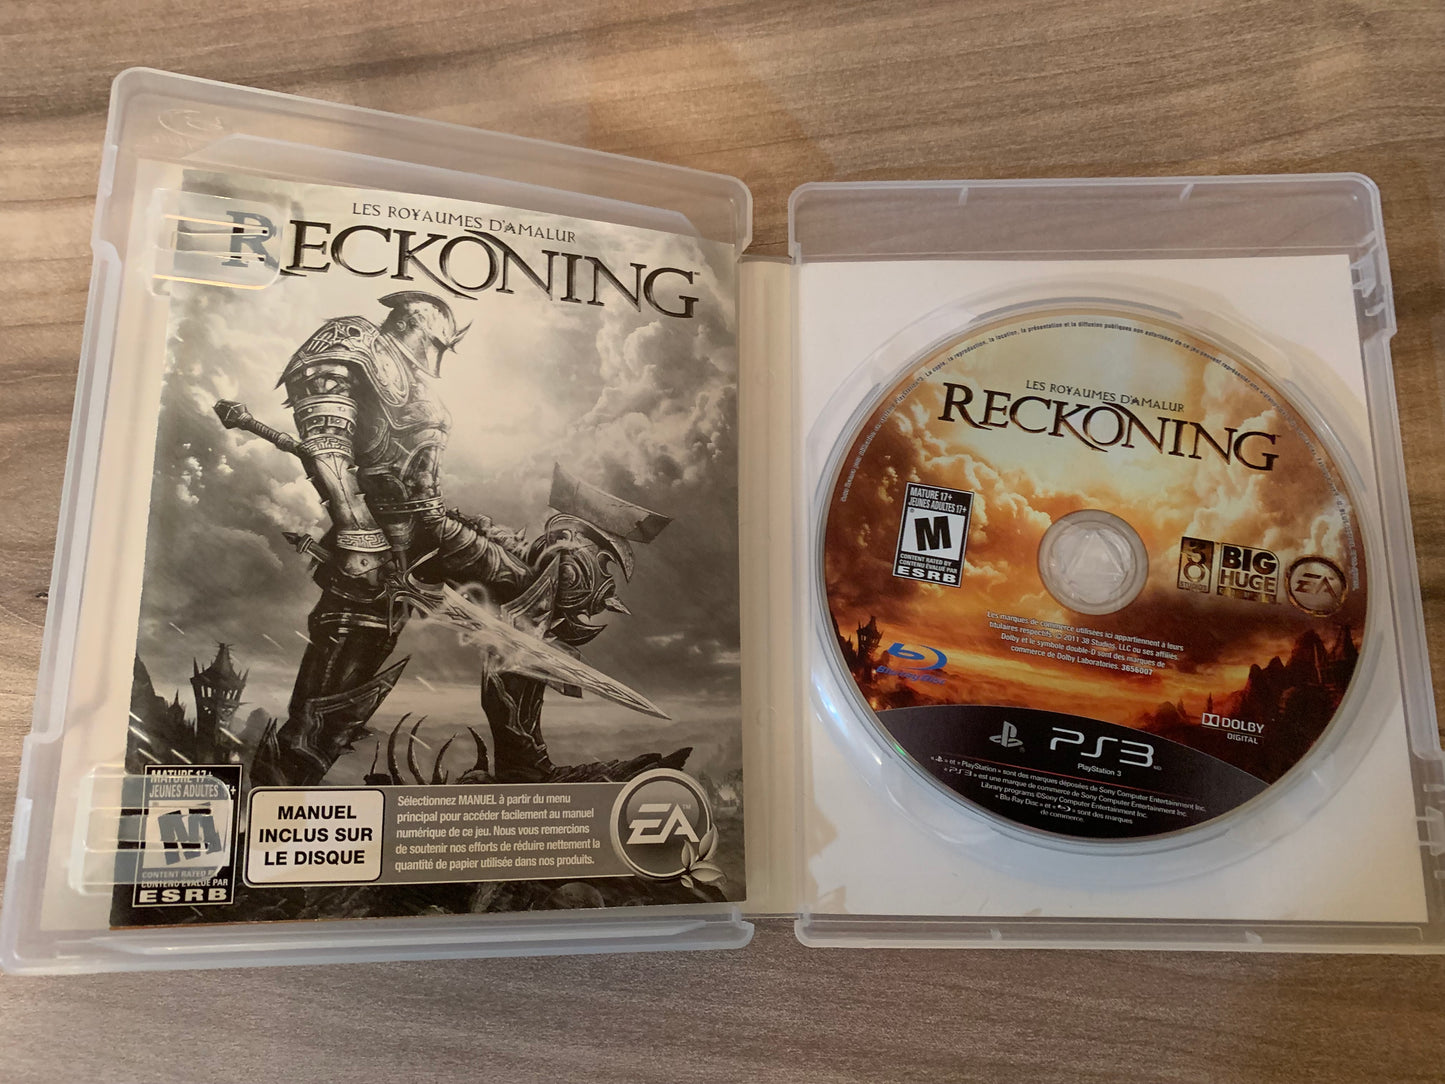 SONY PLAYSTATiON 3 [PS3] | THE KINGDOM OF AMALUR RECKONiNG (KiNGDOM OF AMALUR) | French version